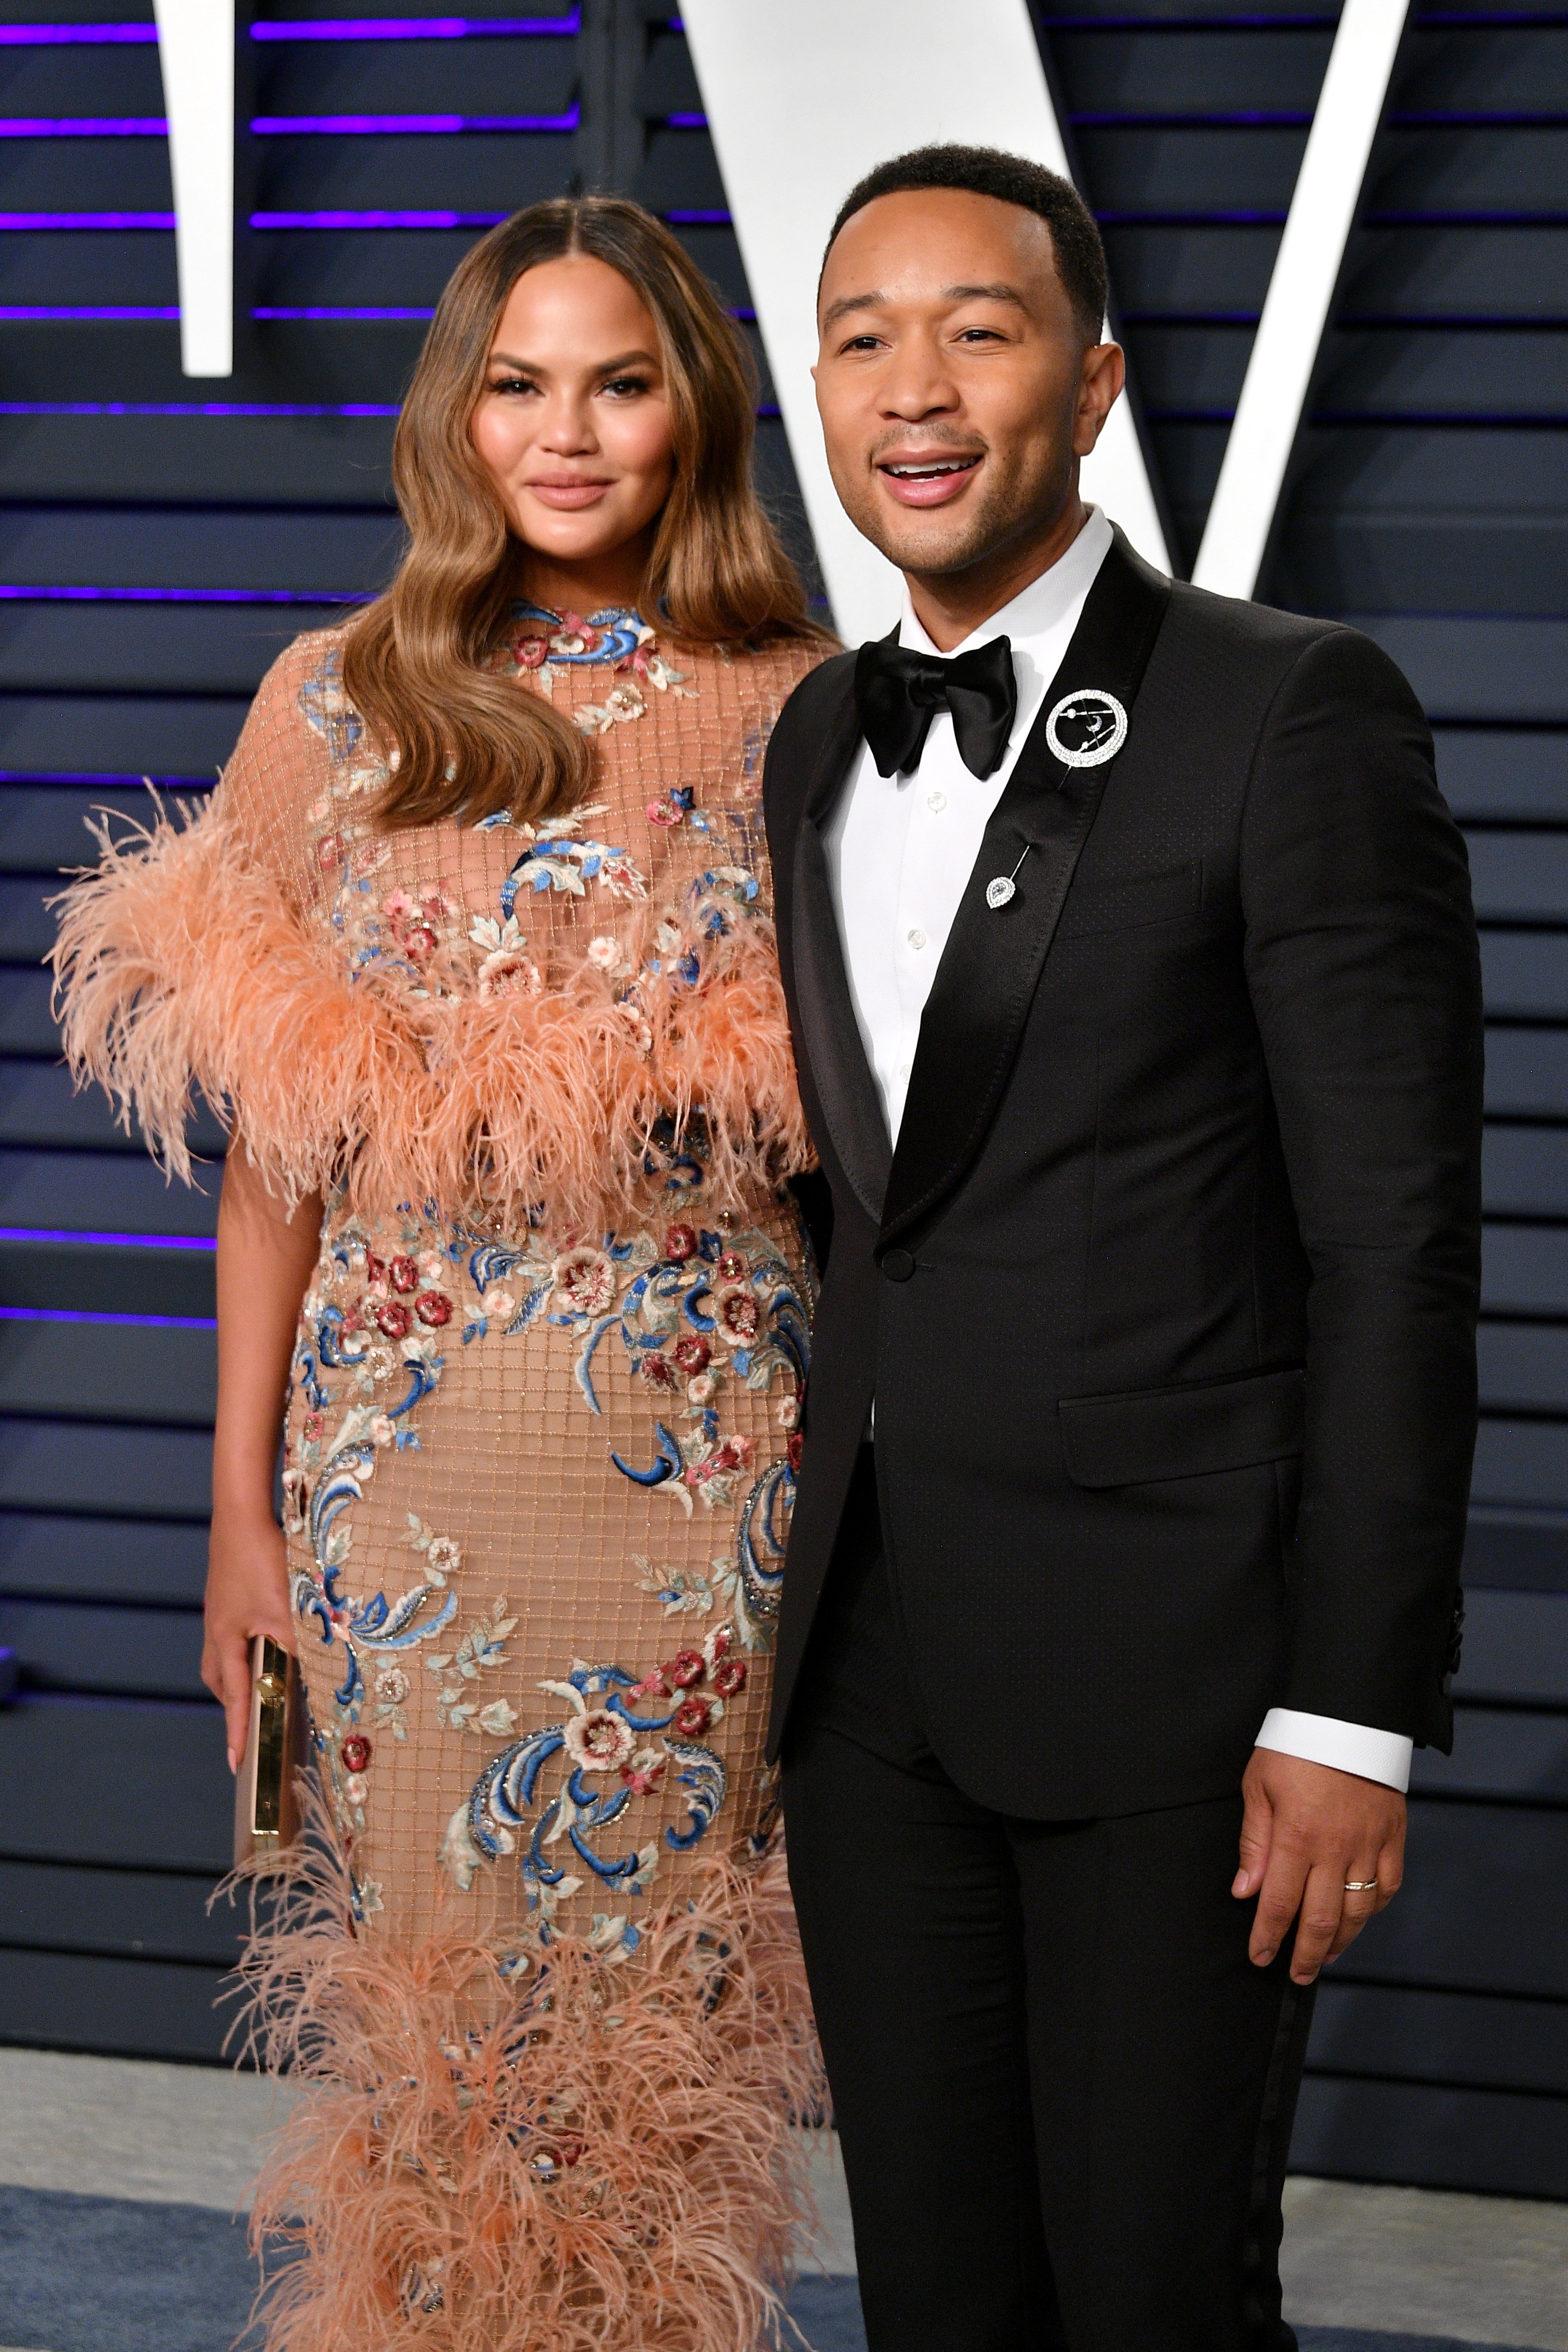 Chrissy Teigen and John Legend at the 2019 Vanity Fair Oscar Party on February 24, 2019, in Beverly Hills, California. | Source: Getty Images